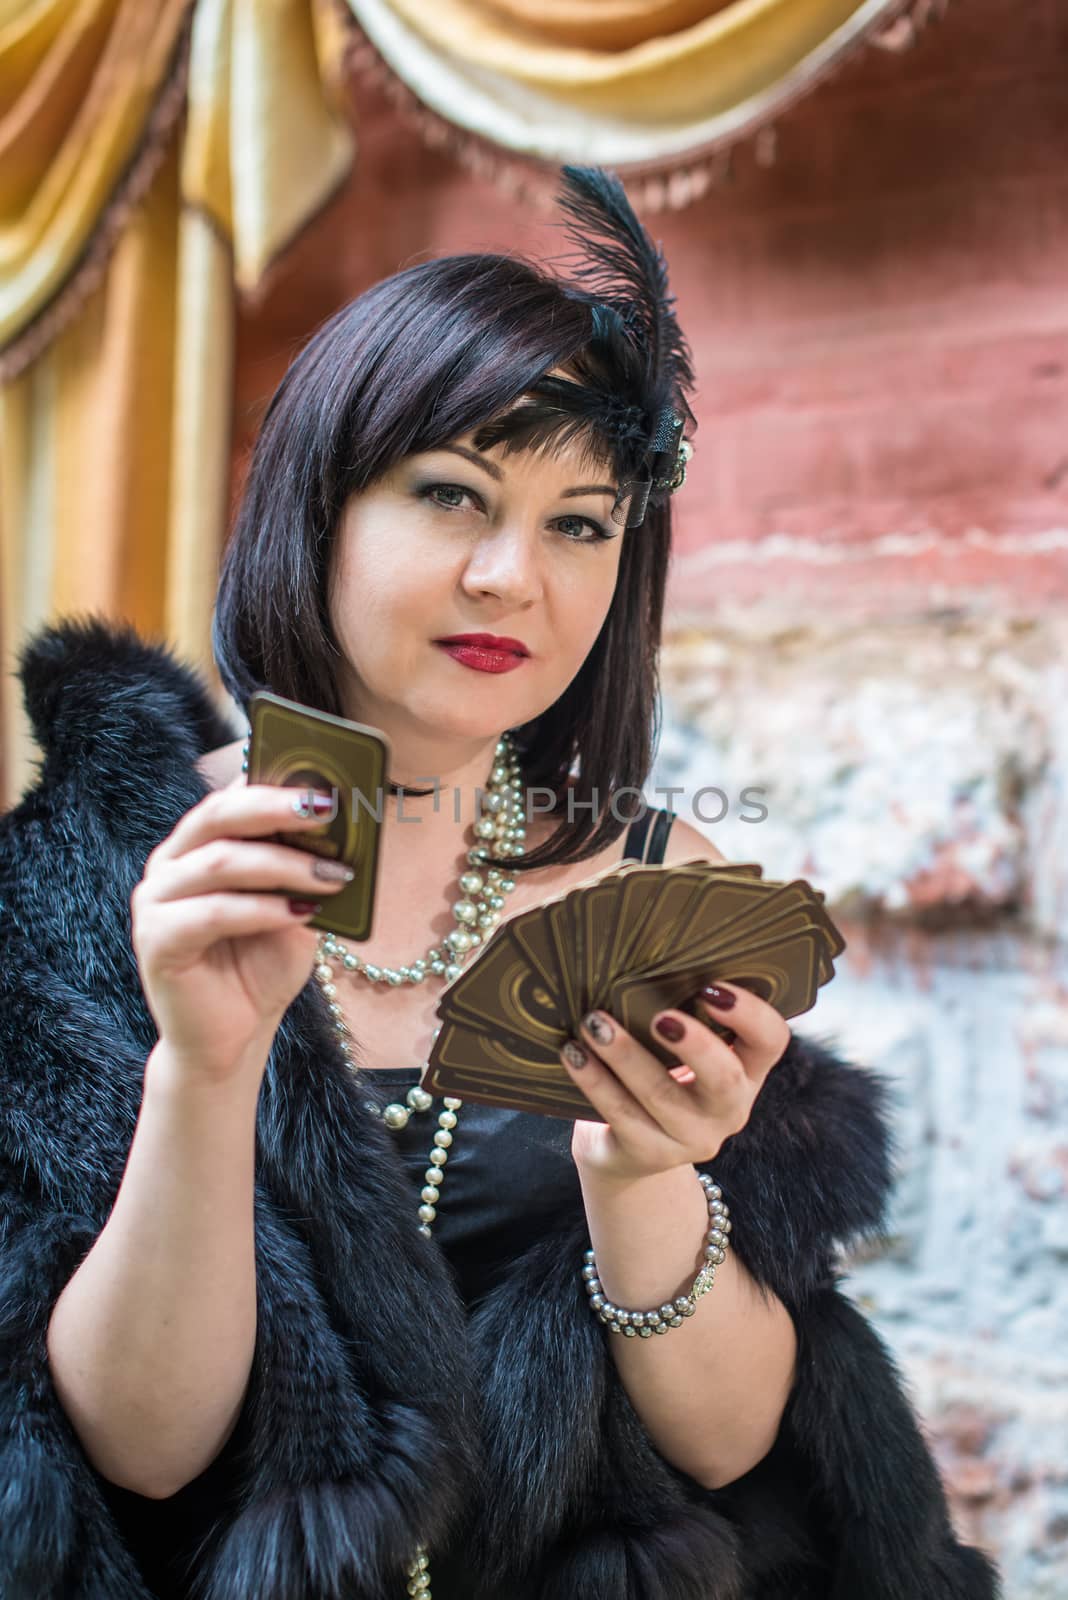 Beautiful retro woman in a black dress holding playing cards